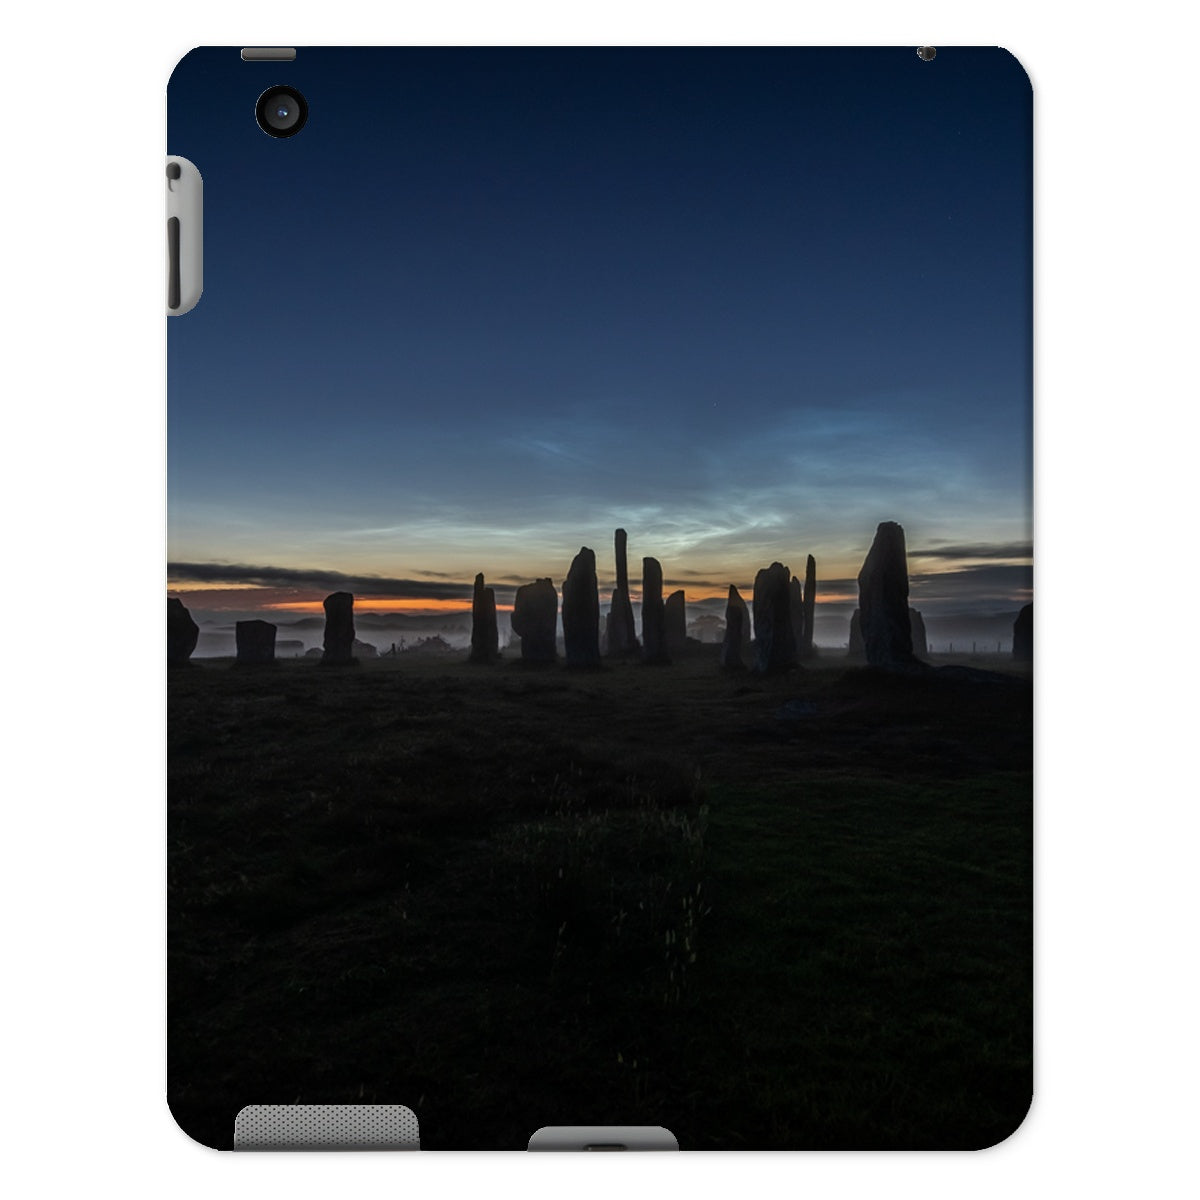 Callanish Stones and Noctilucent Clouds Tablet Cases